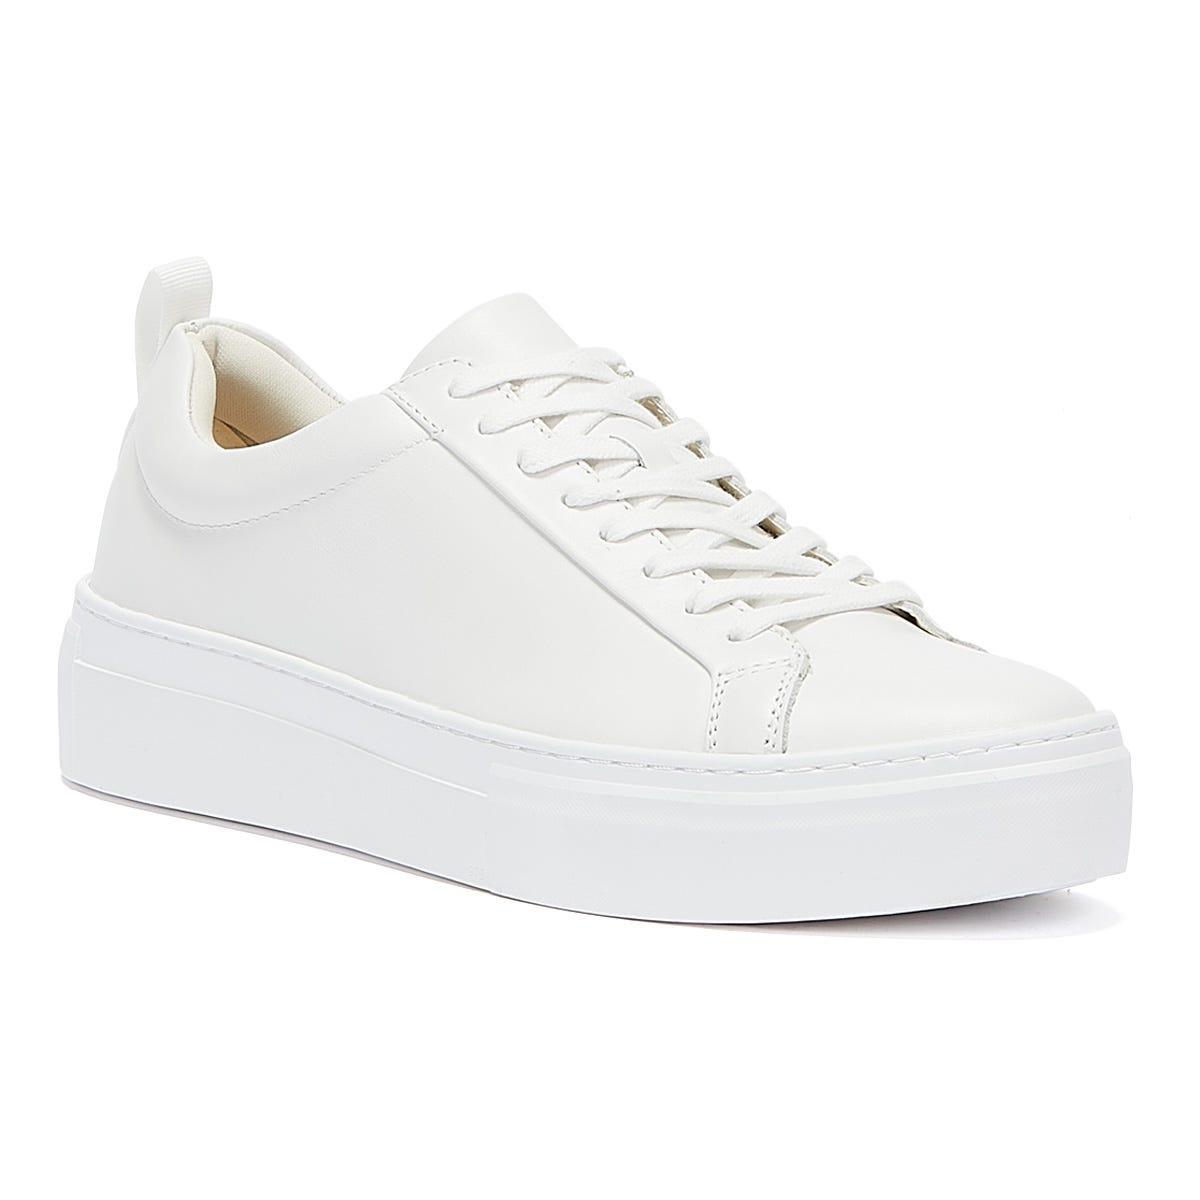 Vagabond Shoemakers Leather Zoe Platform Lace Up Trainers in White | Lyst